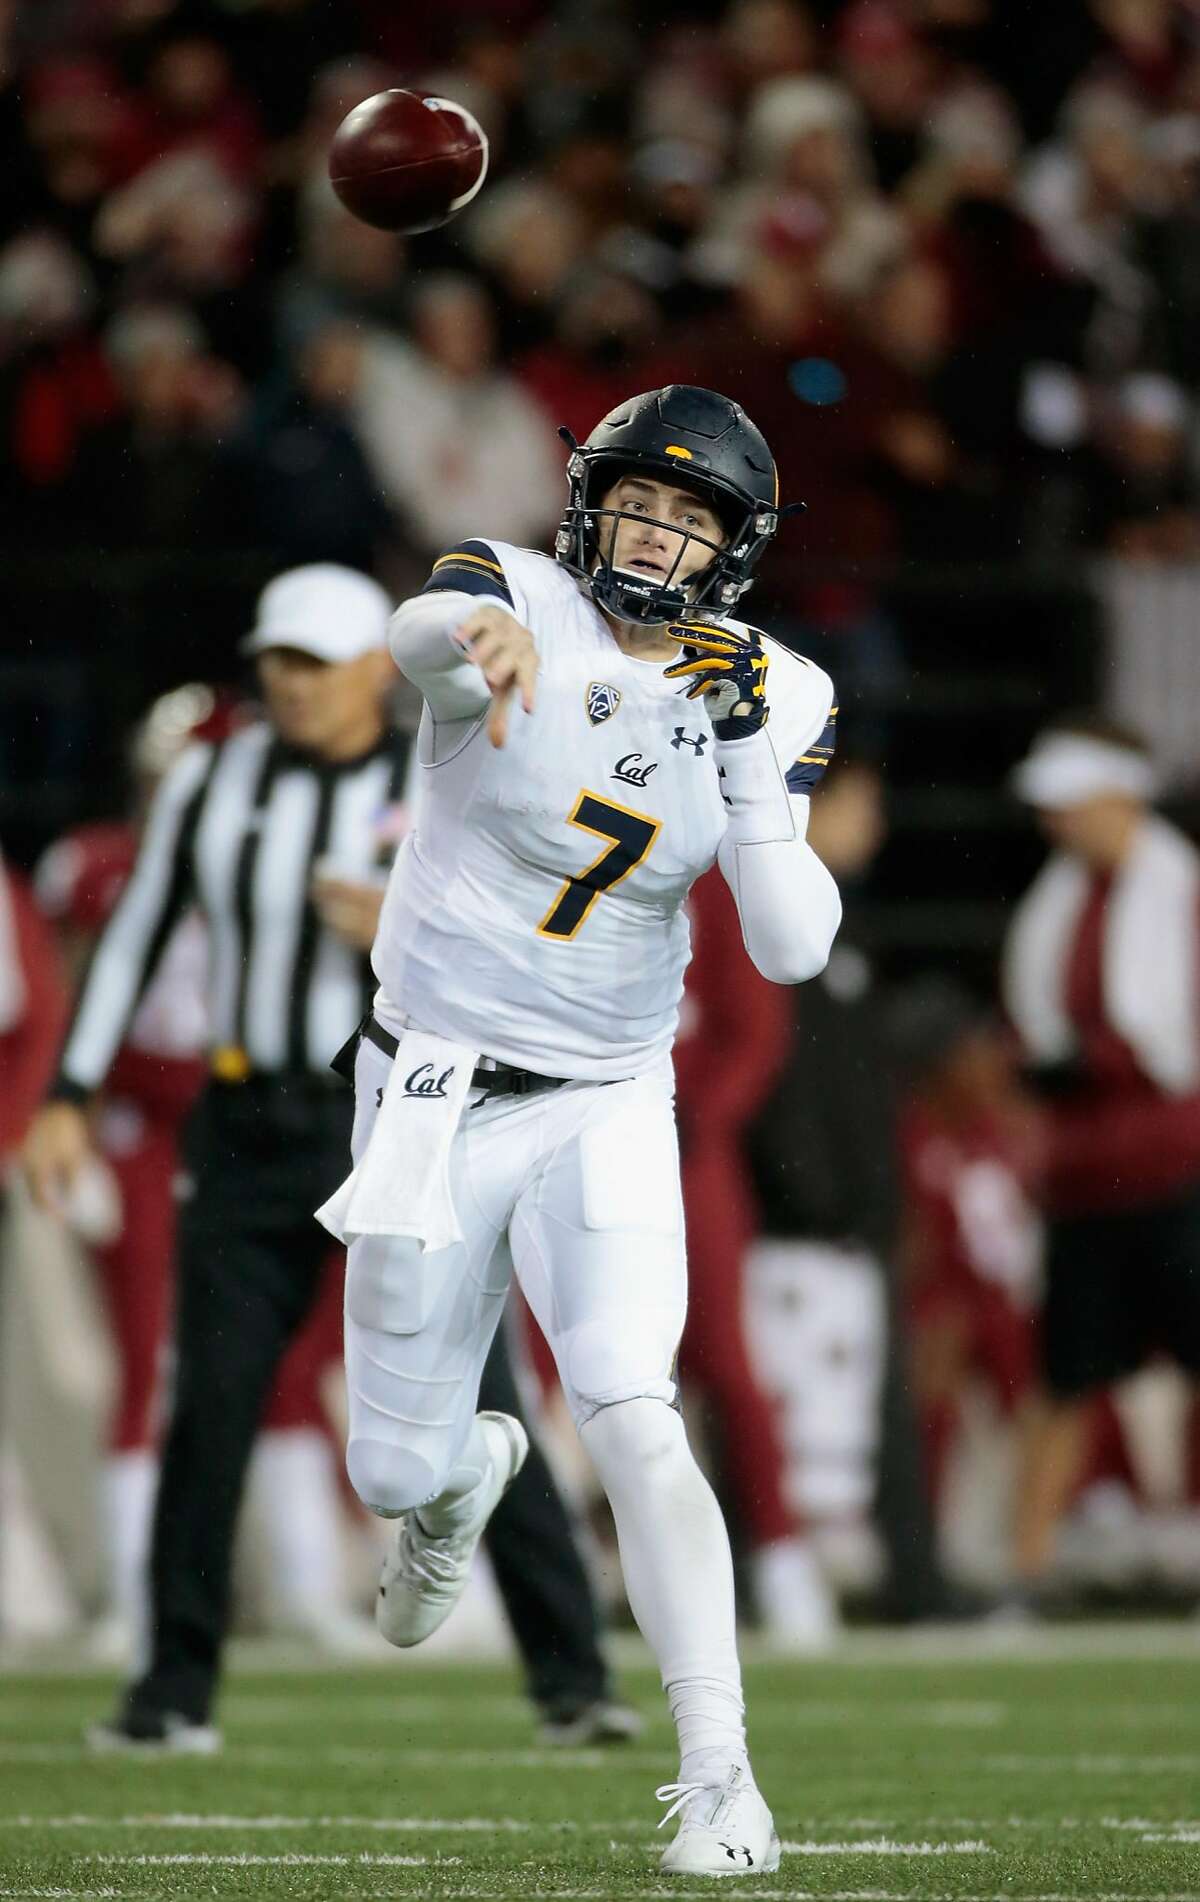 PULLMAN, WA - NOVEMBER 03: Quarterback Chase Garbers #7 of the California Golden Bears throws a pass against the Washington State Cougars in the first half at Martin Stadium on November 3, 2018 in Pullman, Washington. (Photo by William Mancebo/Getty Images)